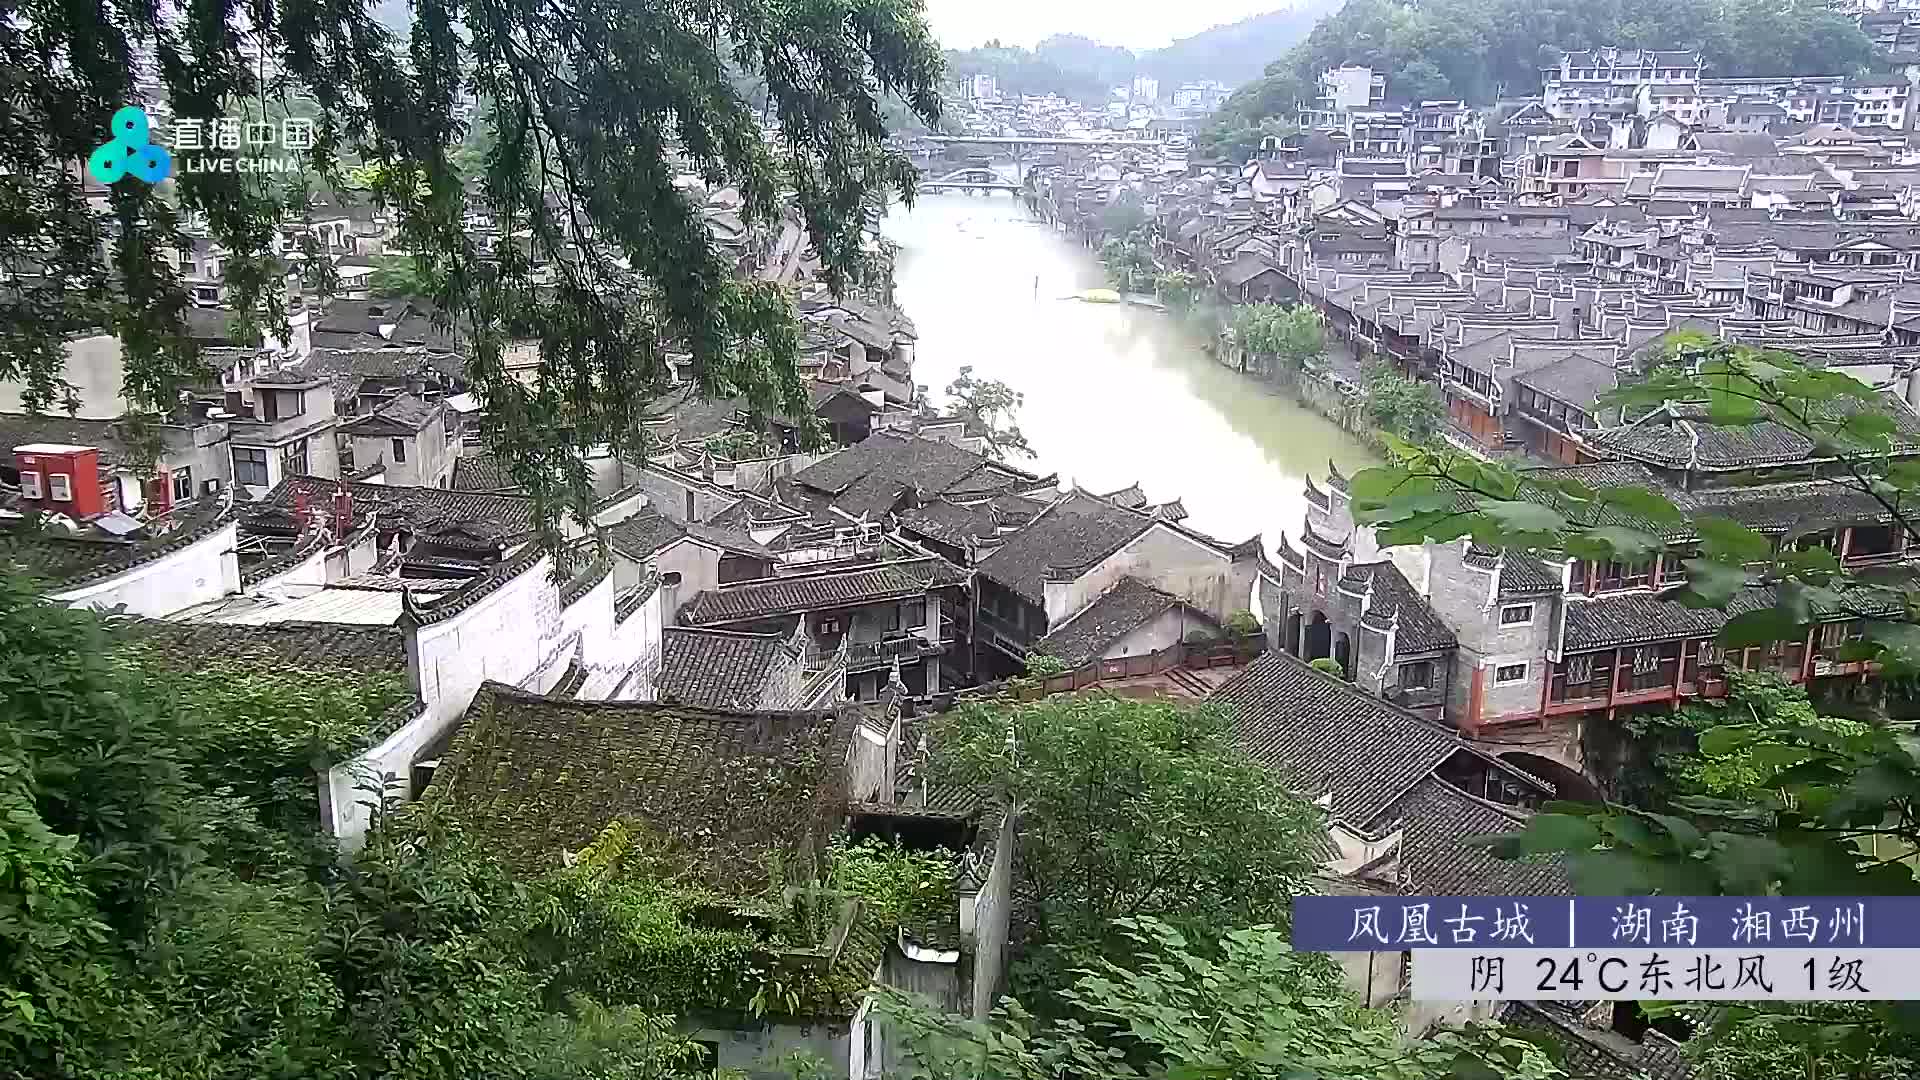 Fenghuang Dom. 06:48